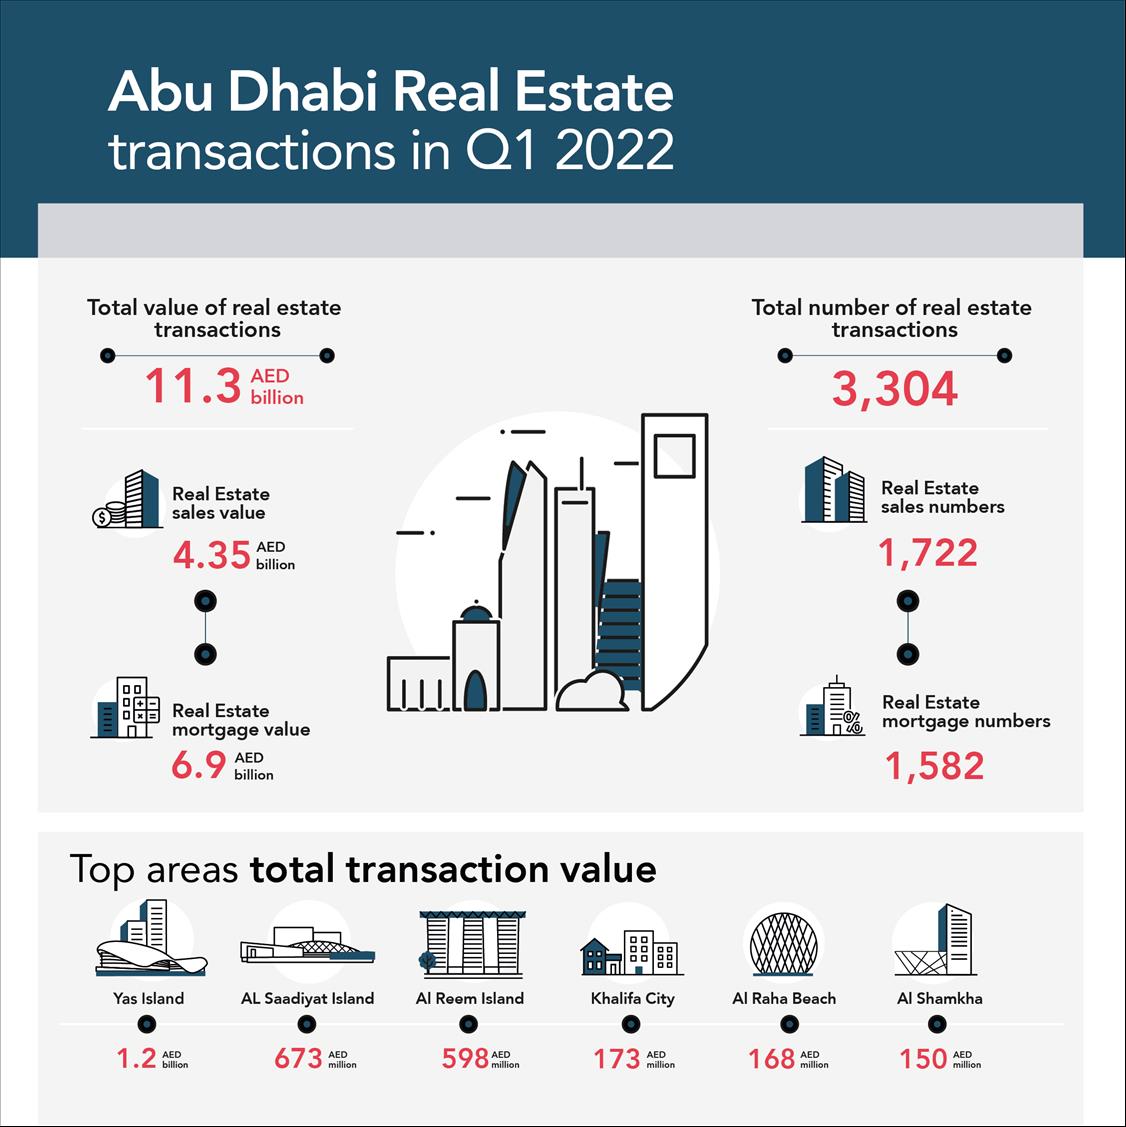 Real Estate Transactions In Abu Dhabi Exceed 11.3 Billion AED In The First Quarter Of 2022